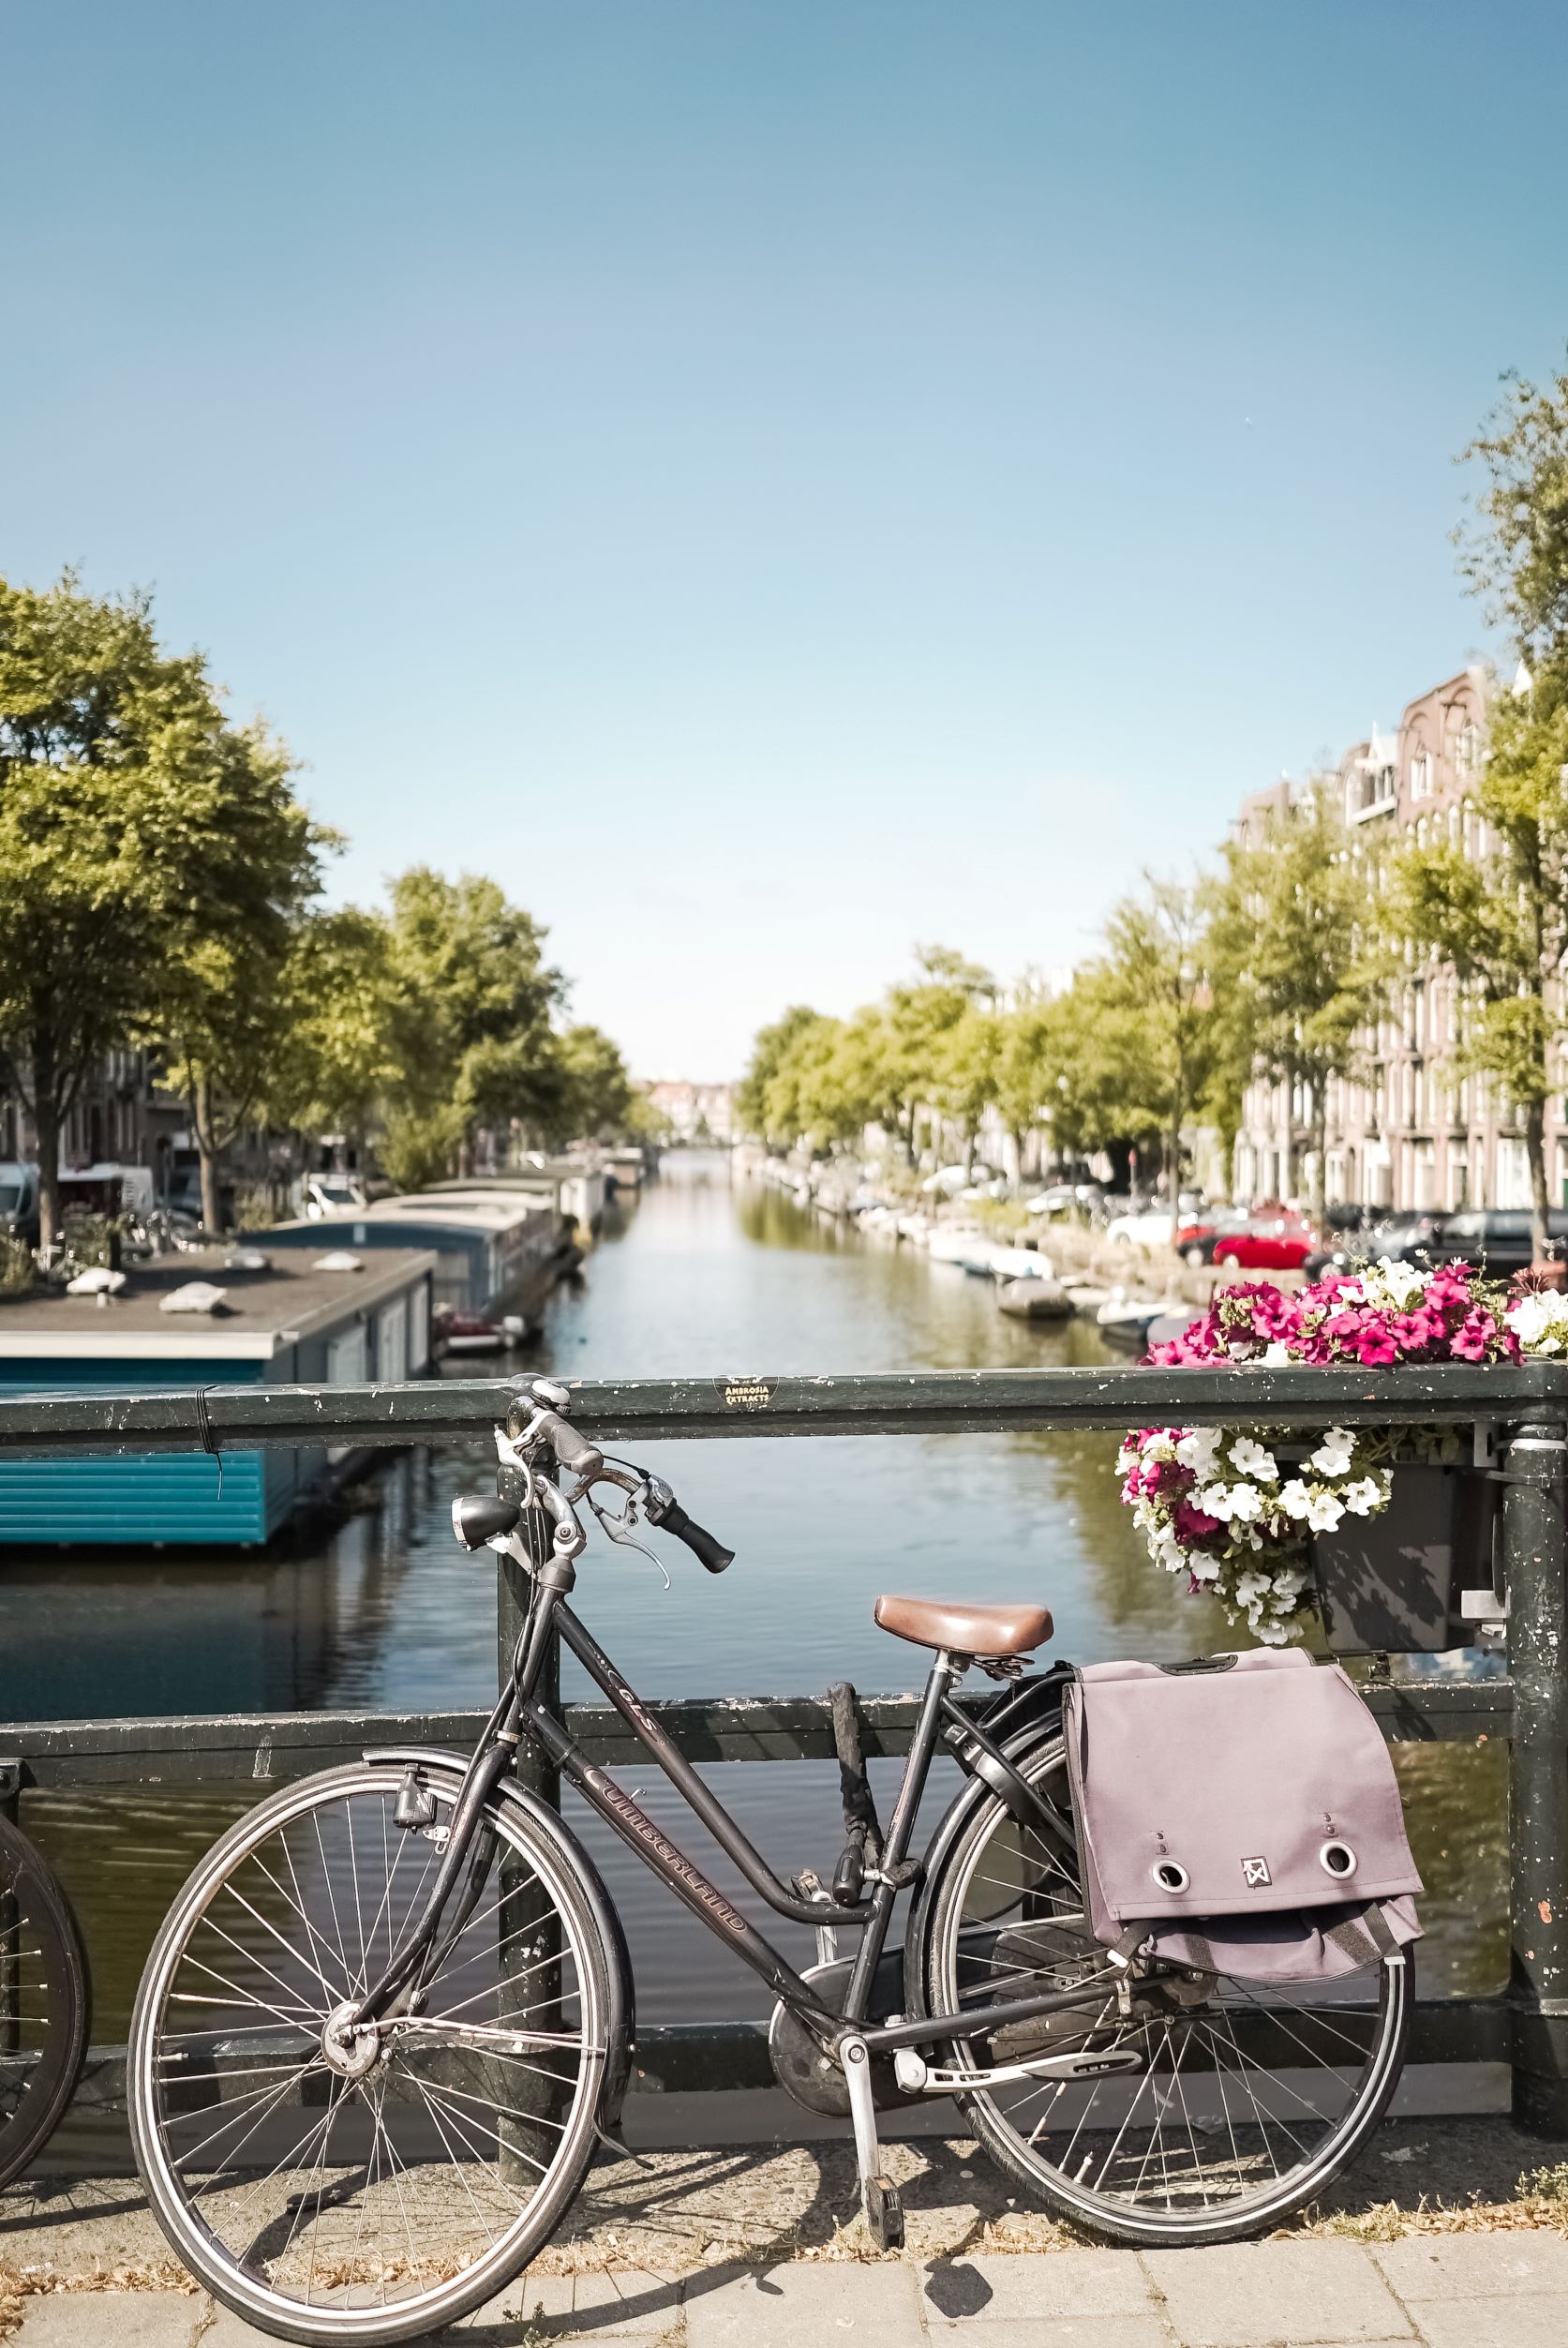 Canals and bikes - things to do in Amsterdam